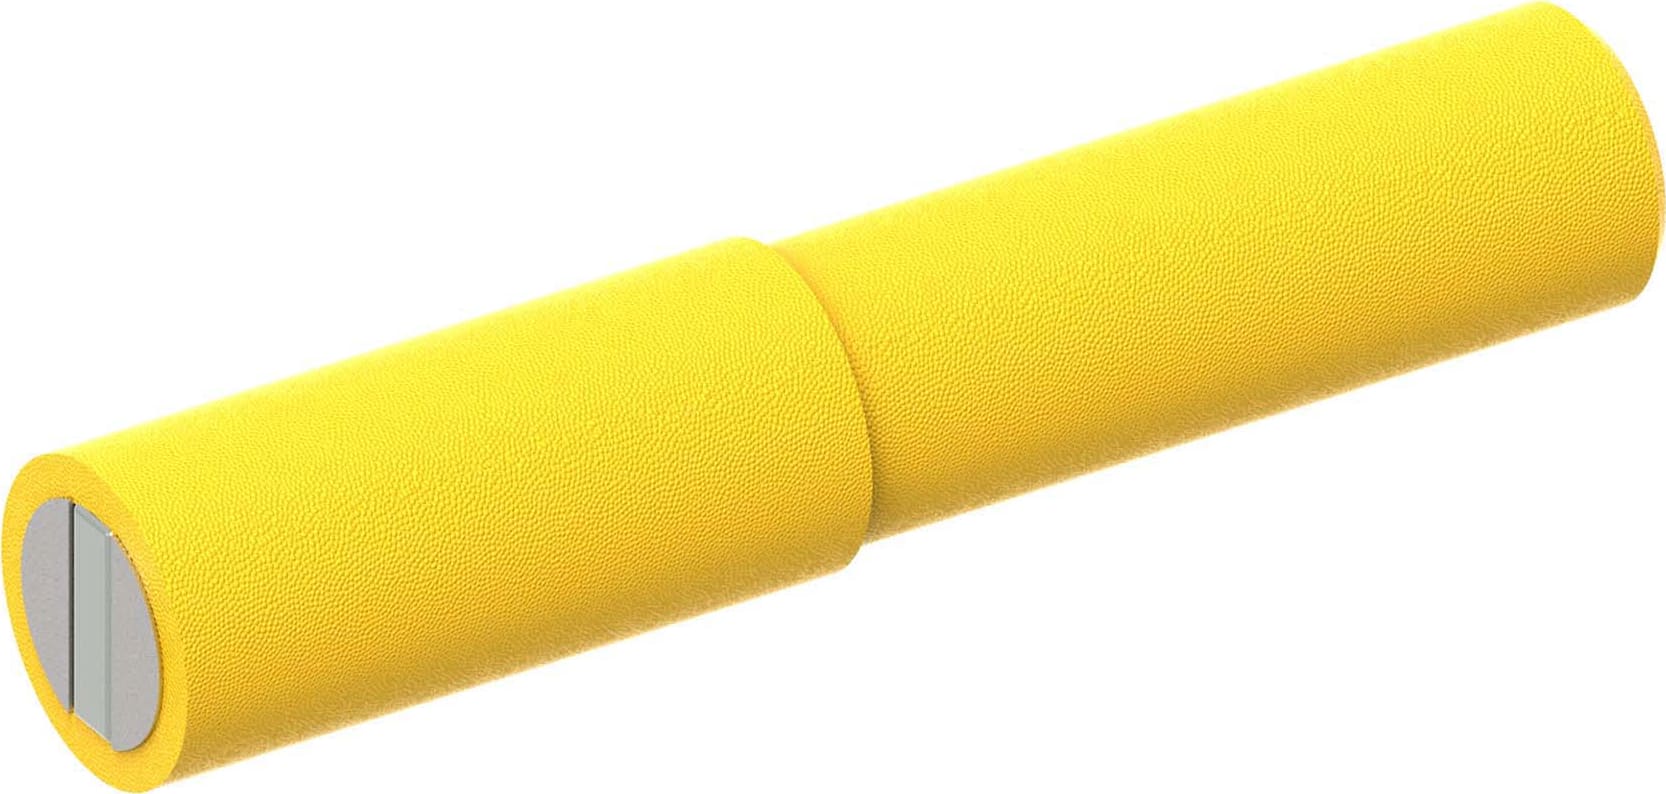 Cal Test CT3878-4 - 7mm Magnetic Connector Yellow